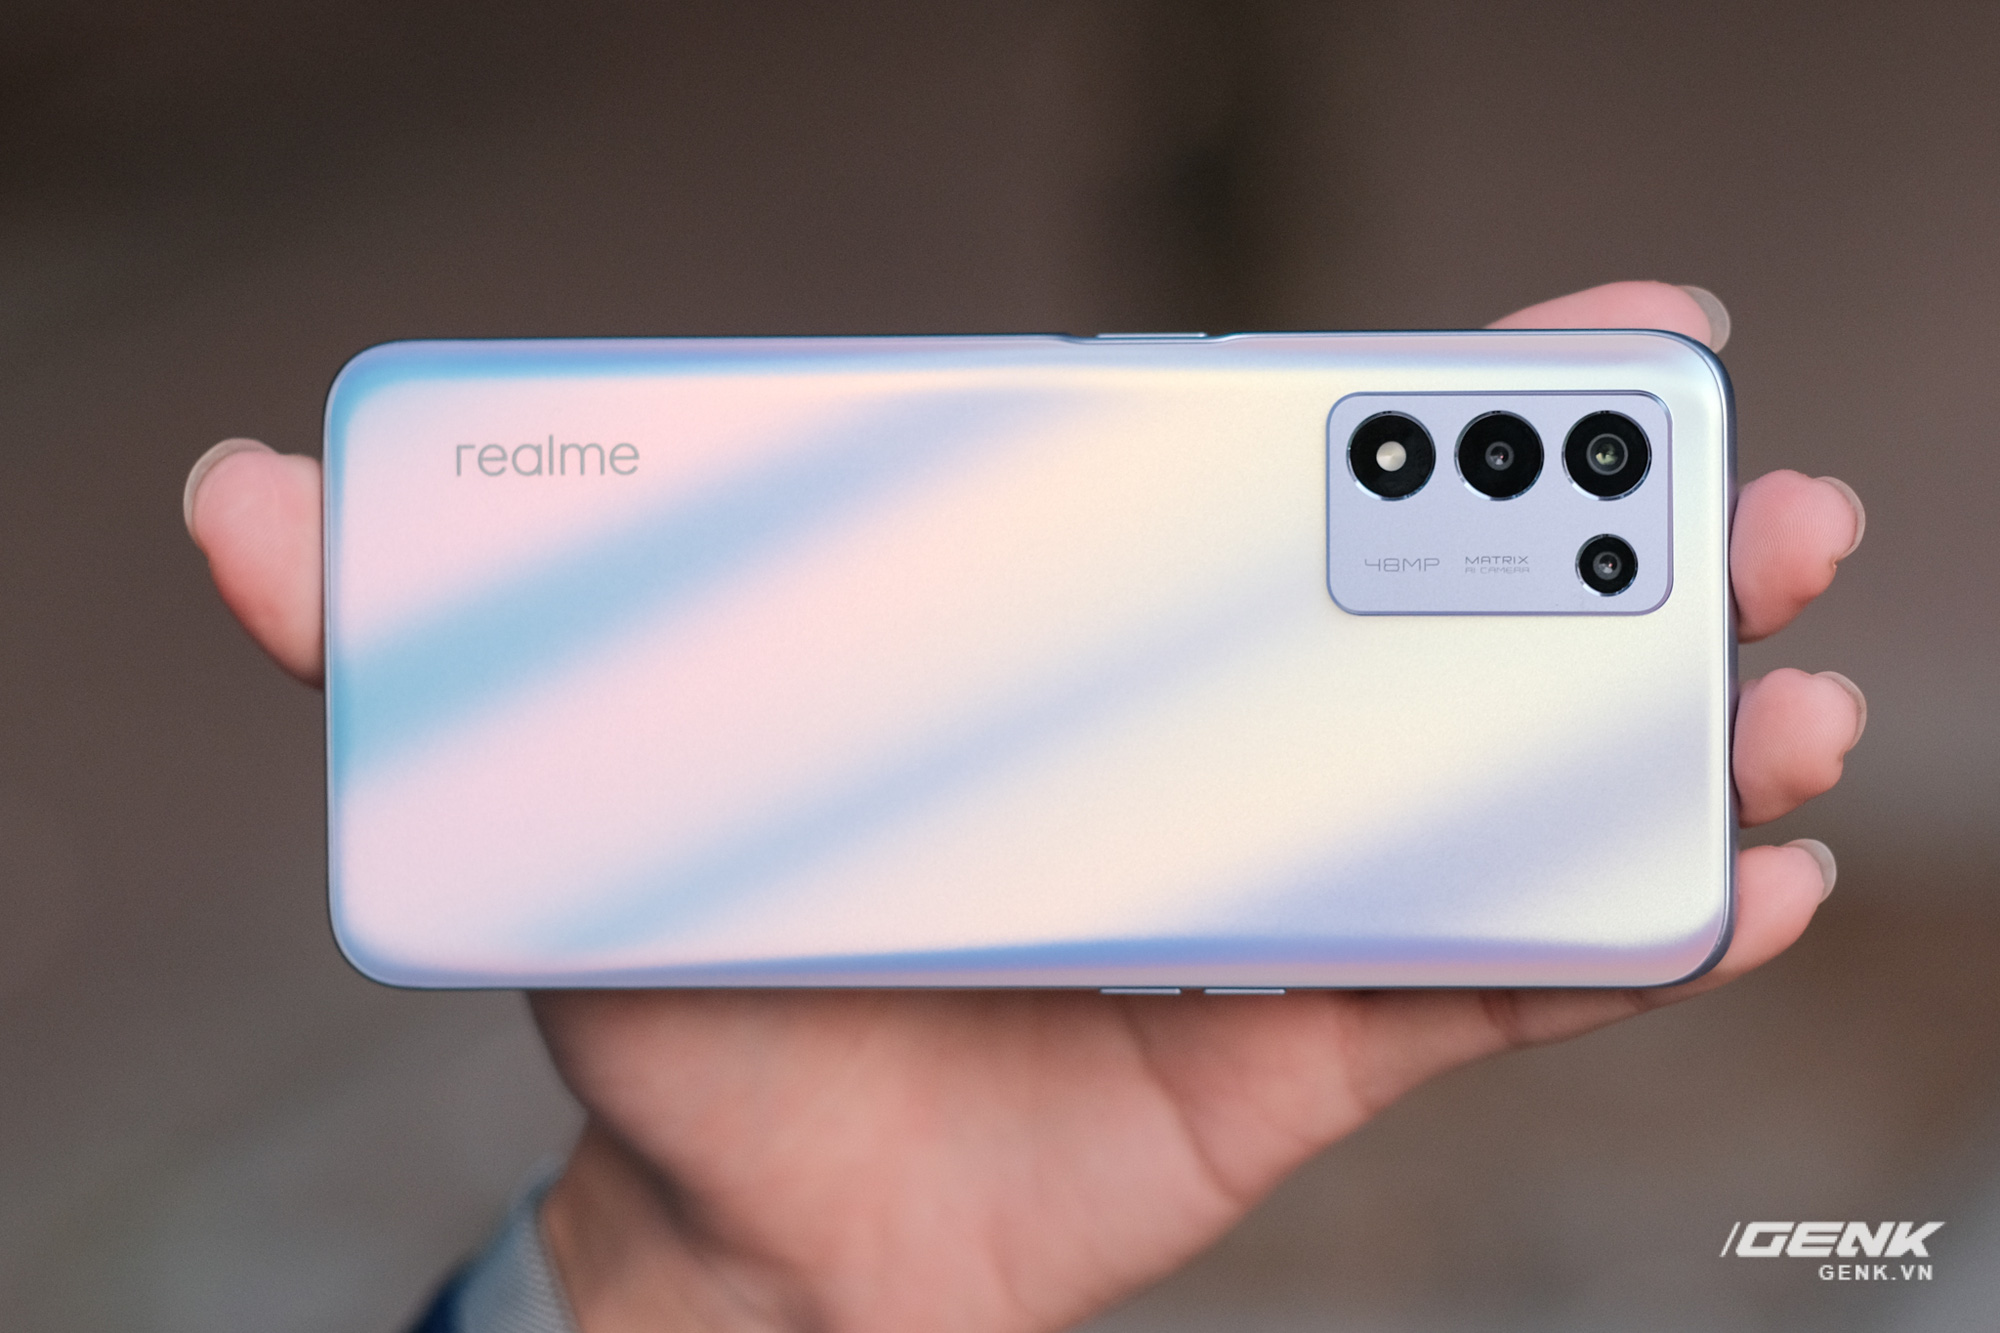 On hand realme Q3s: Smartphone priced under 6 million has a 144Hz screen, the configuration of the device is 10 million - Photo 4.